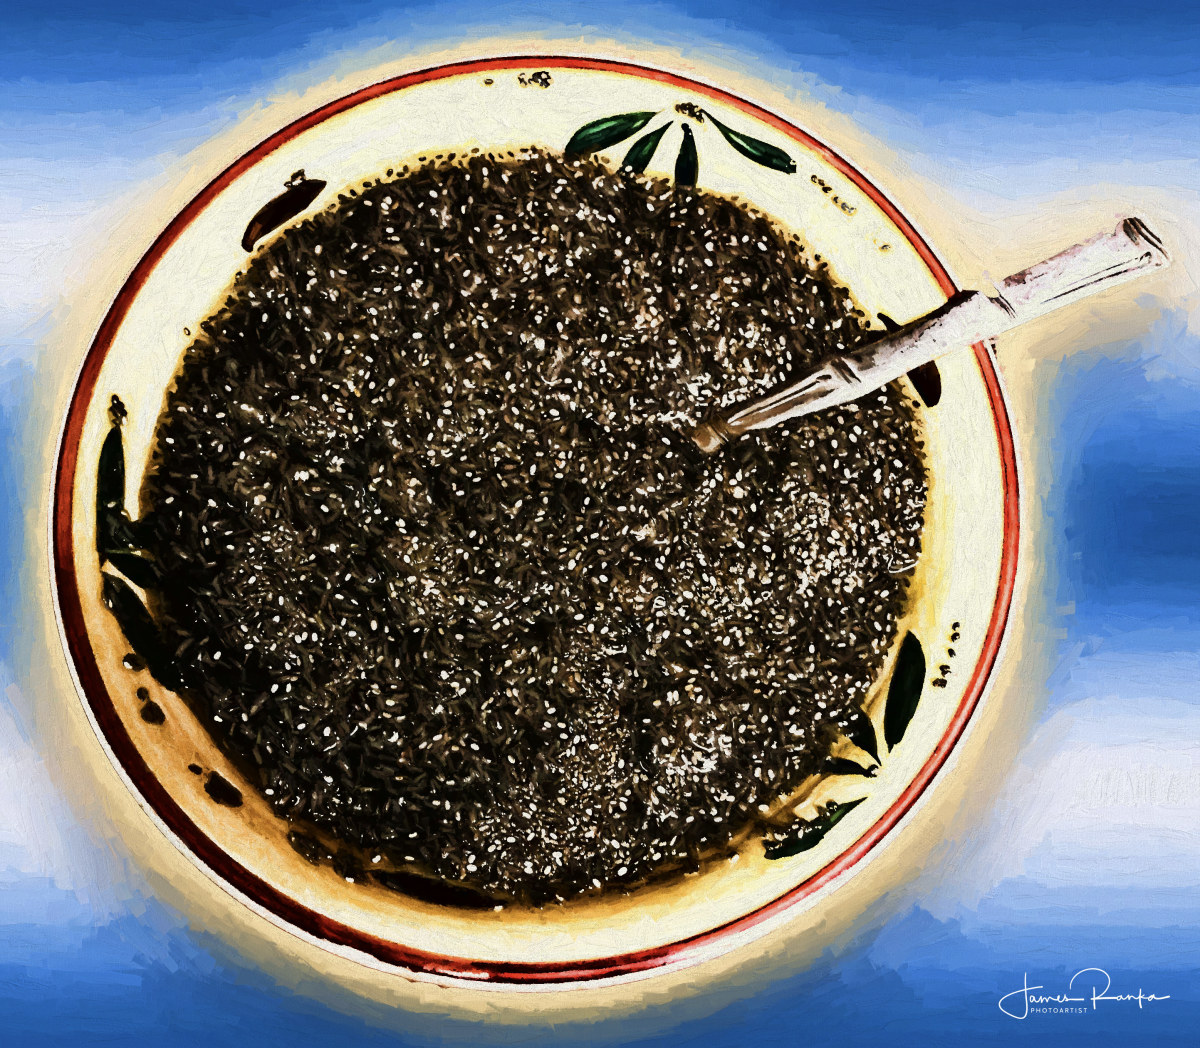 How I Relieved Chronic Constipation Using Raw Organic Chia Seeds